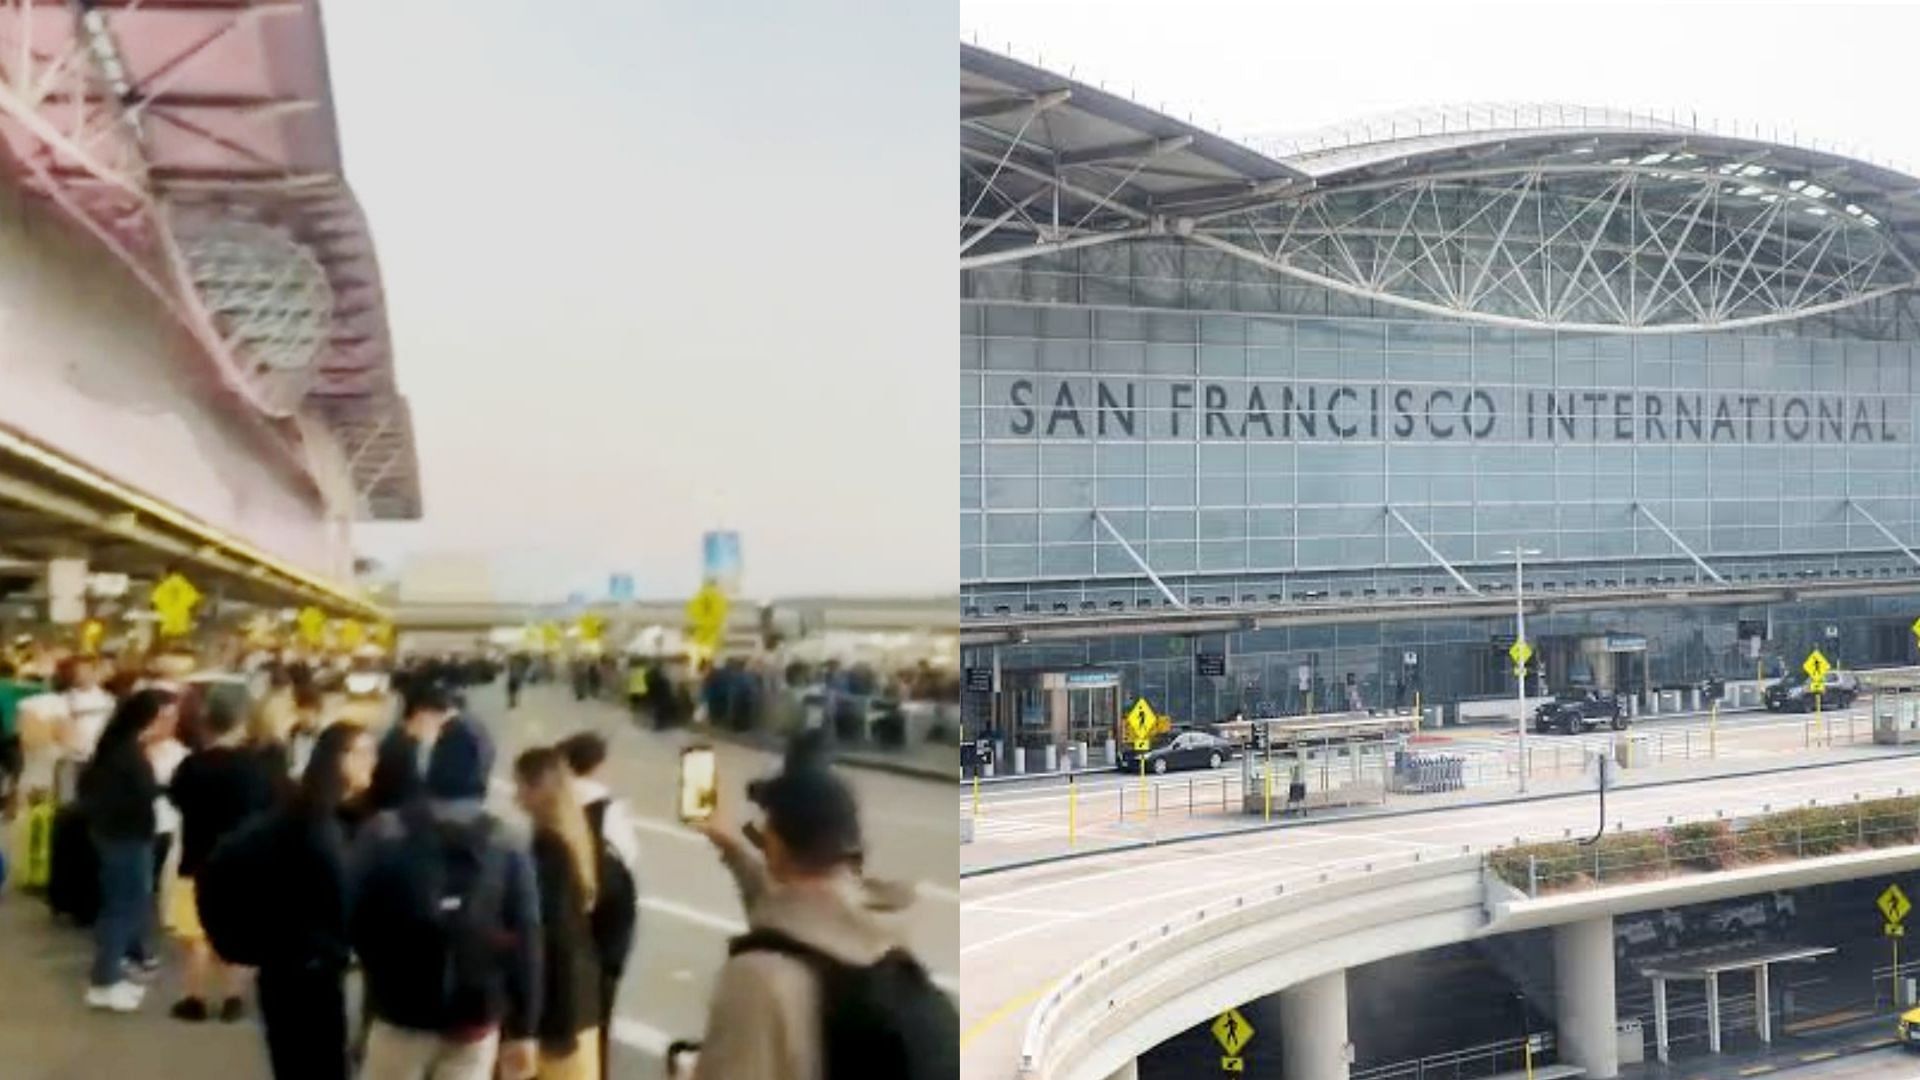 Travelers were evacuated from the San Francisco International Airport after authorities received a bomb alert (Images via Twitter)